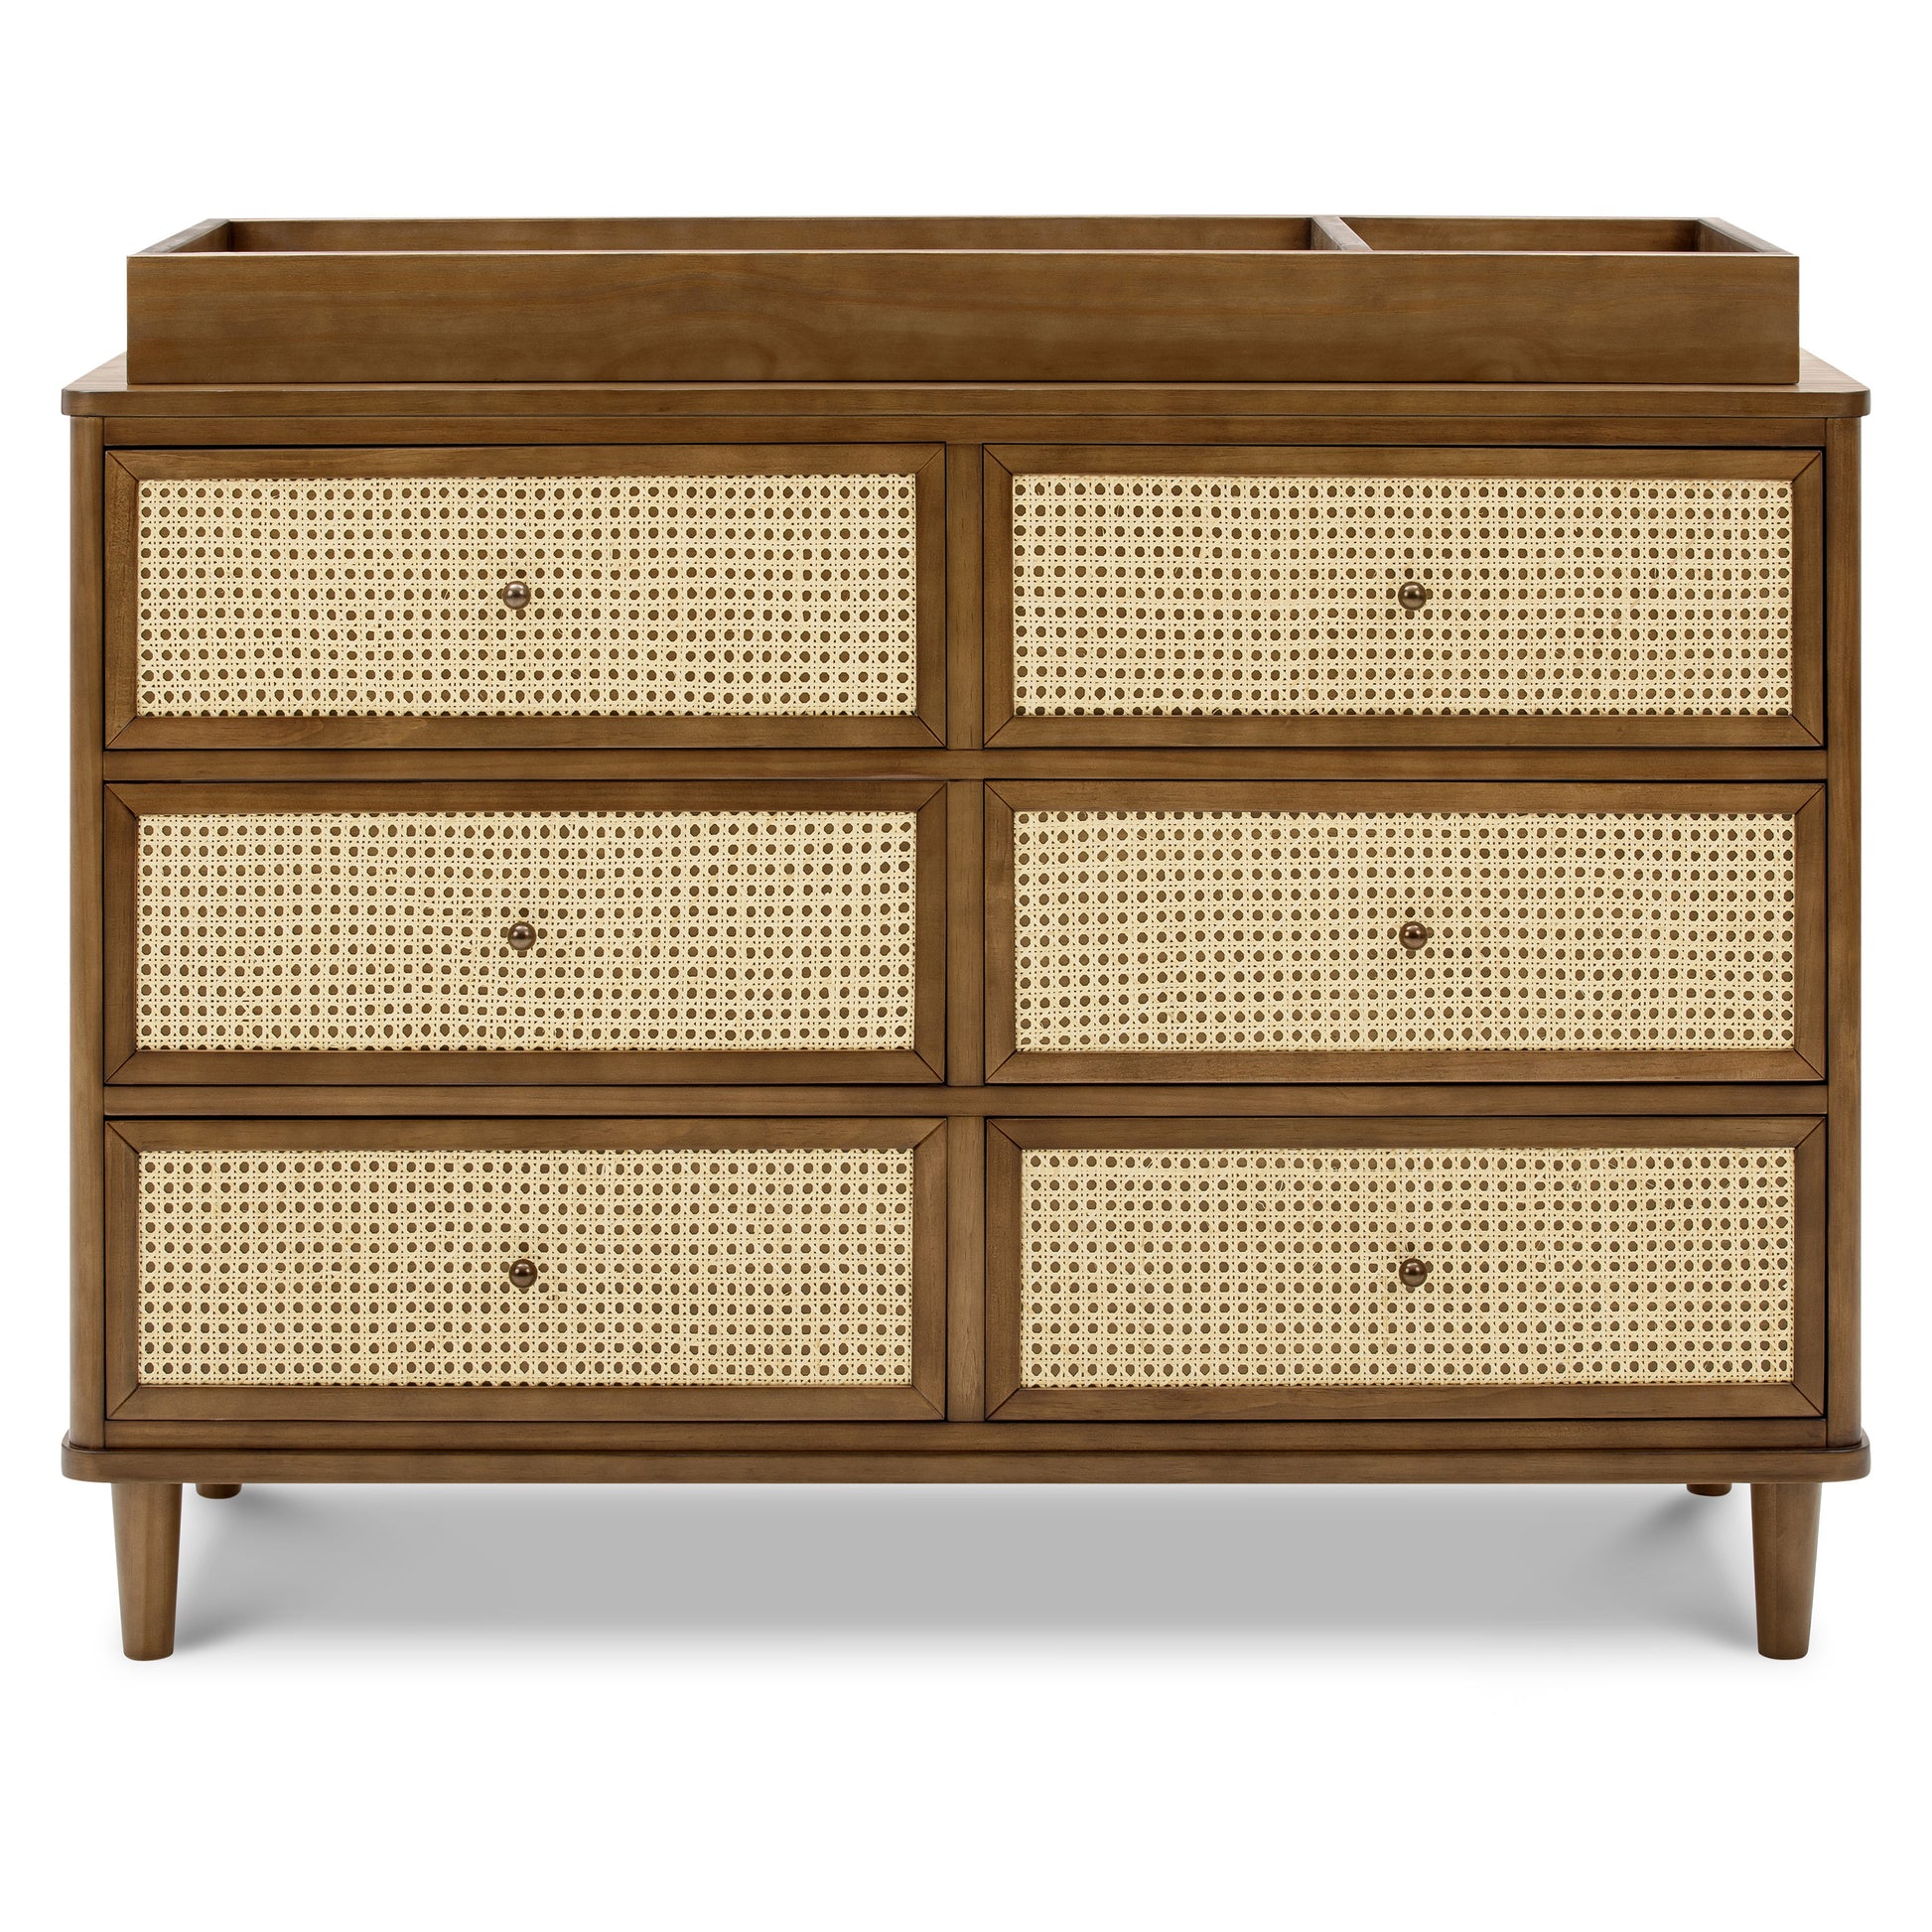 M23716NLBC,Marin with Cane 6 Drawer Assembled Dresser in Natural Walnut and Blonde Cane